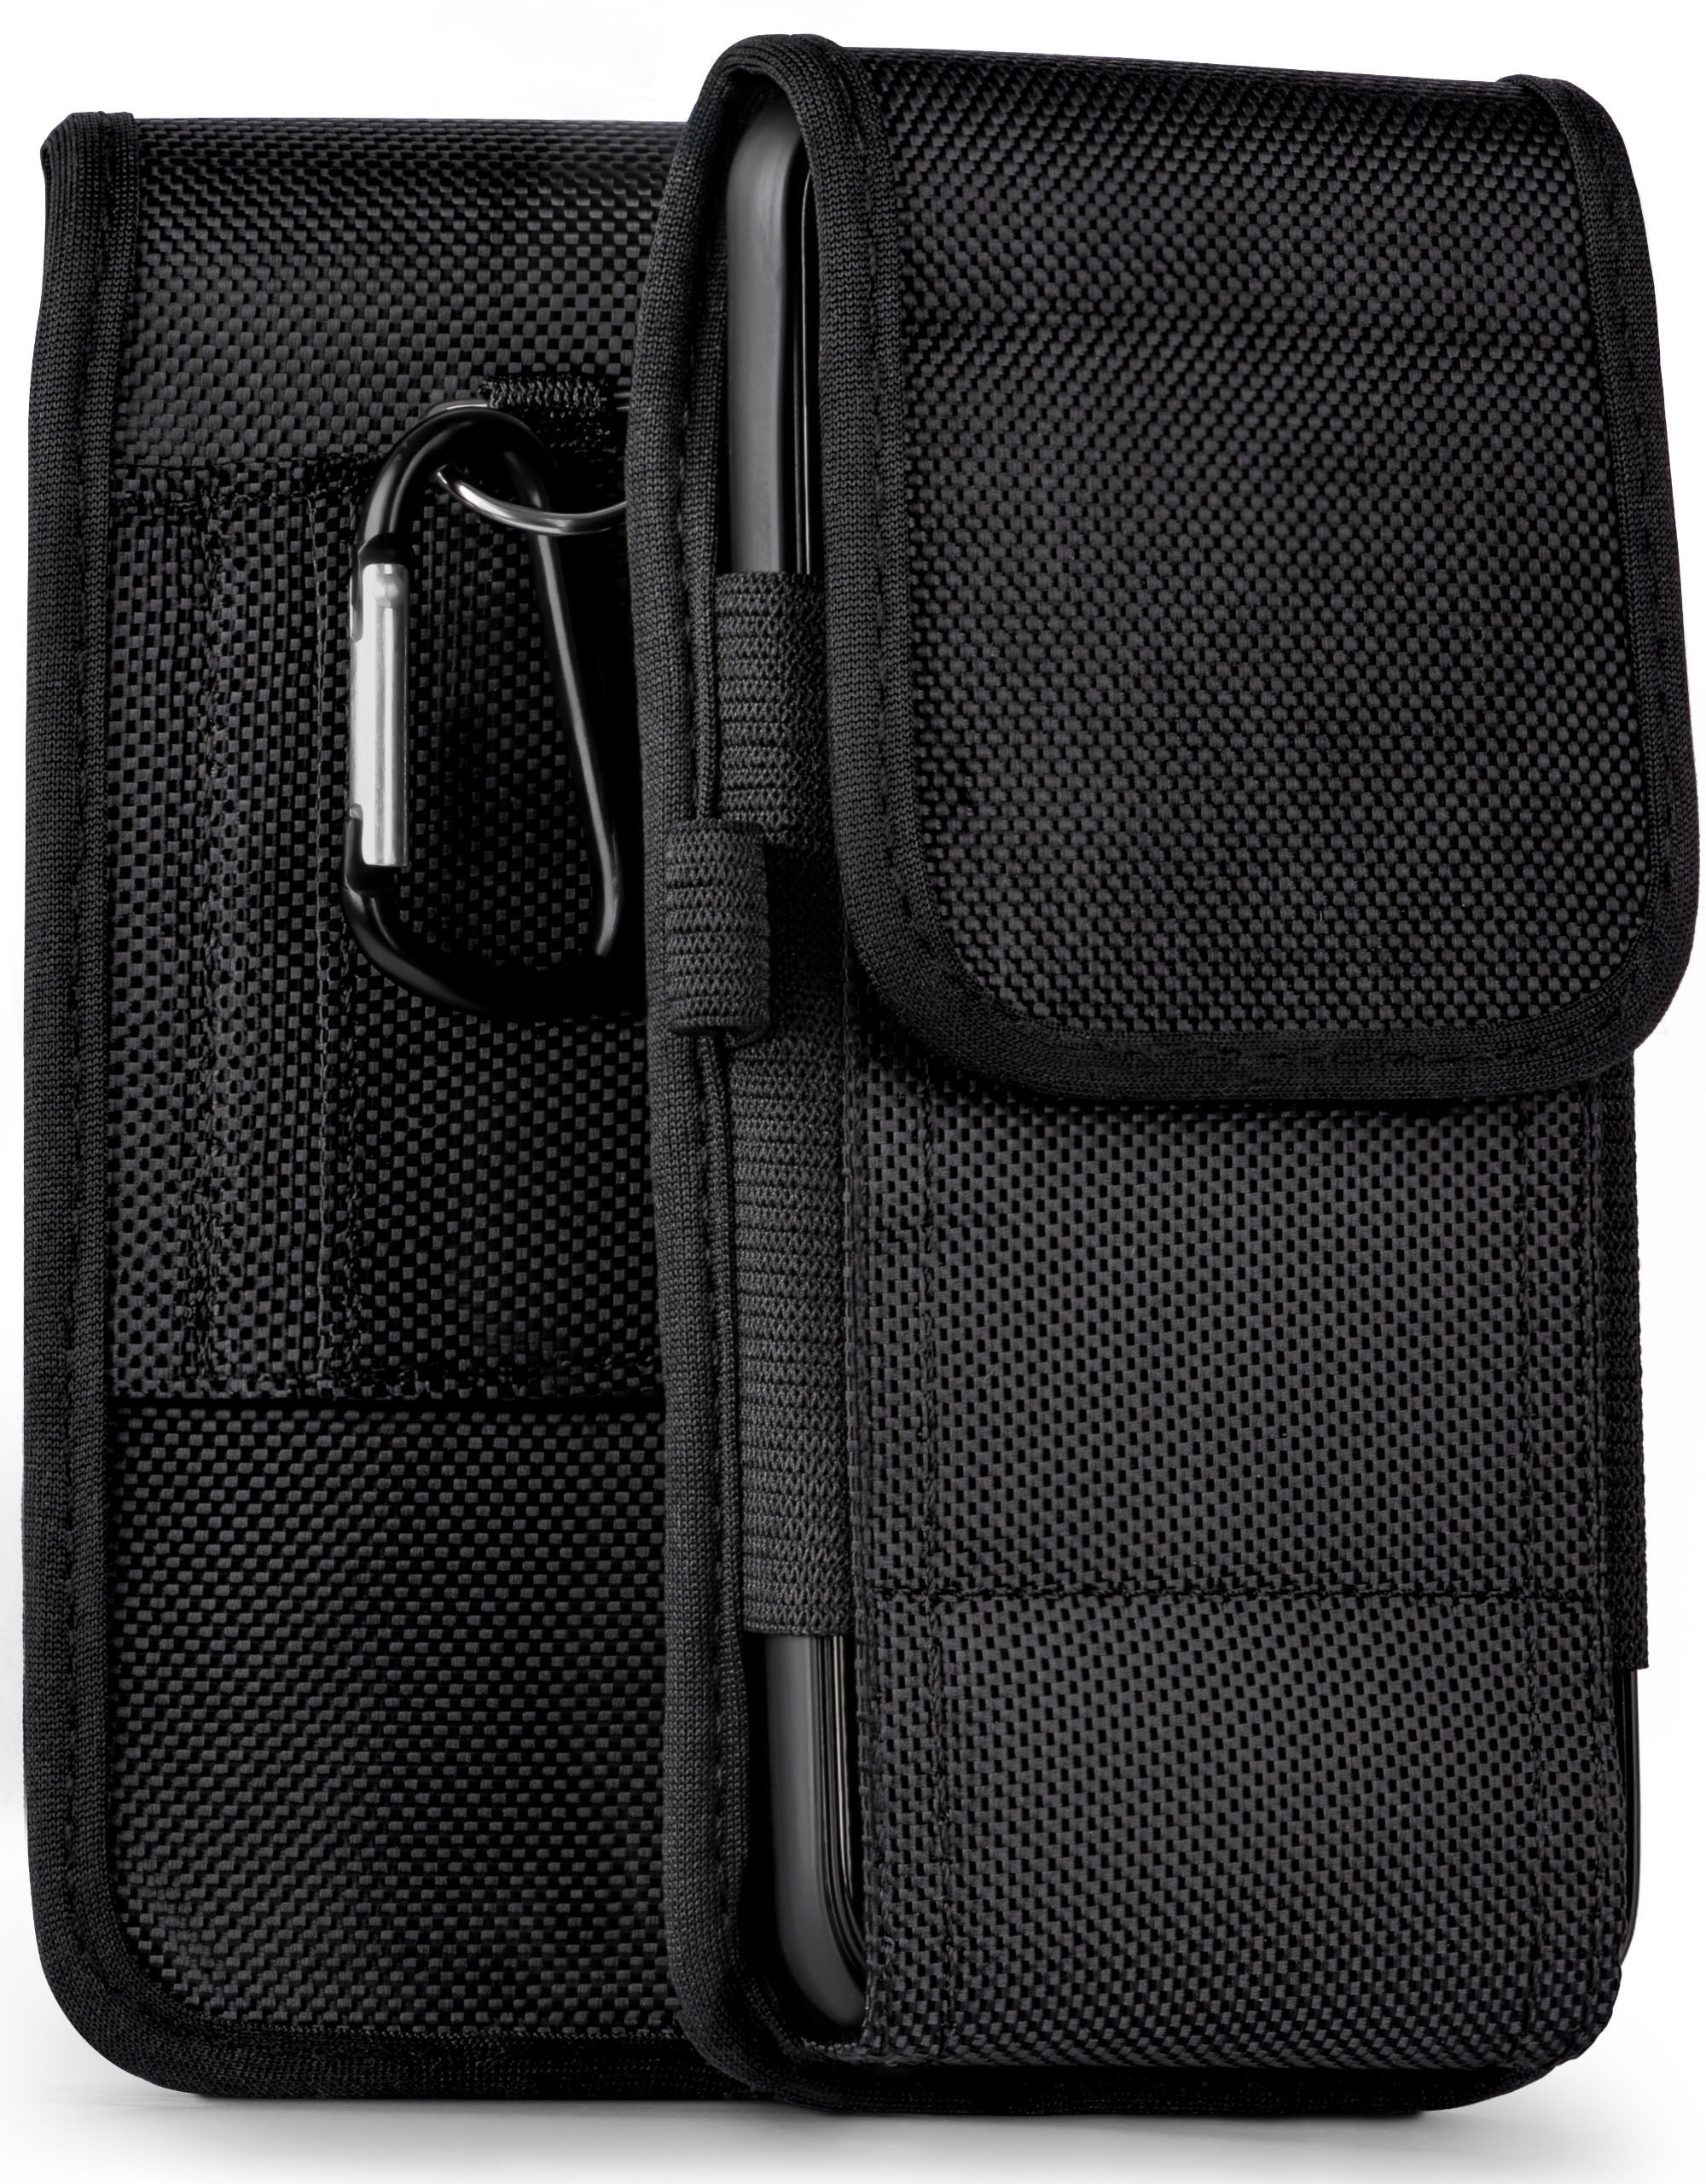 GS270 Case, Holster, Agility GS270 Gigaset, Plus, / Trail MOEX